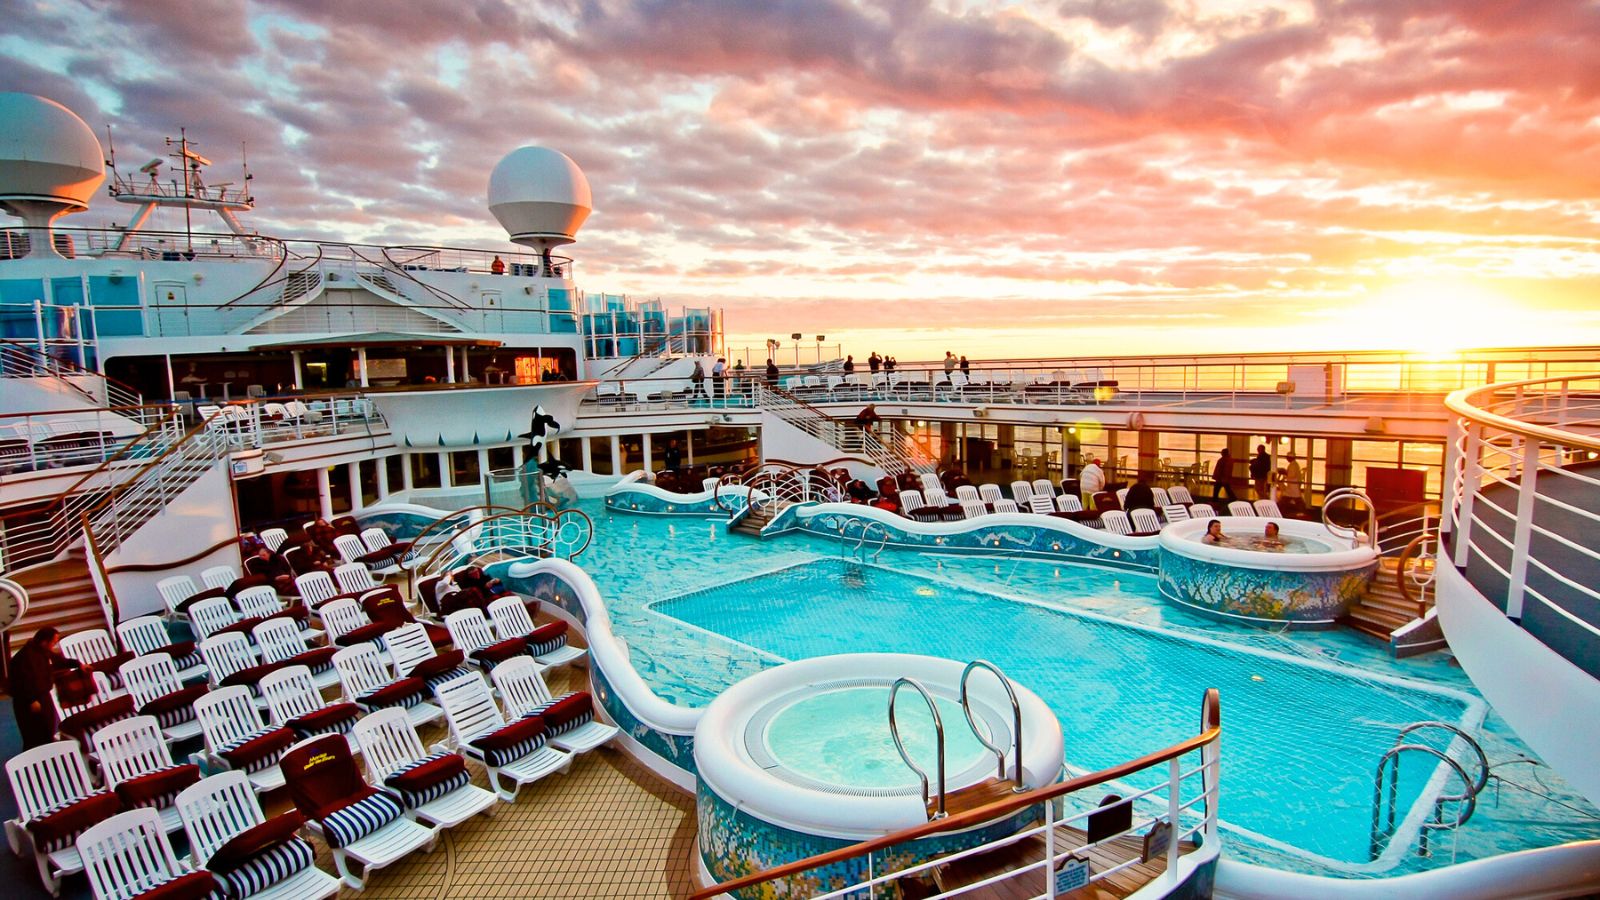 <p>Newer ships offer the latest and greatest on-board amenities and entertainment. But they also charge premium prices.</p><p>The opposite is true for older cruise ships. While they’ll still be comfortable, they don’t have all the bells and whistles. However, that has a silver lining. It makes them less appealing to customers, which translates to lower prices.</p>